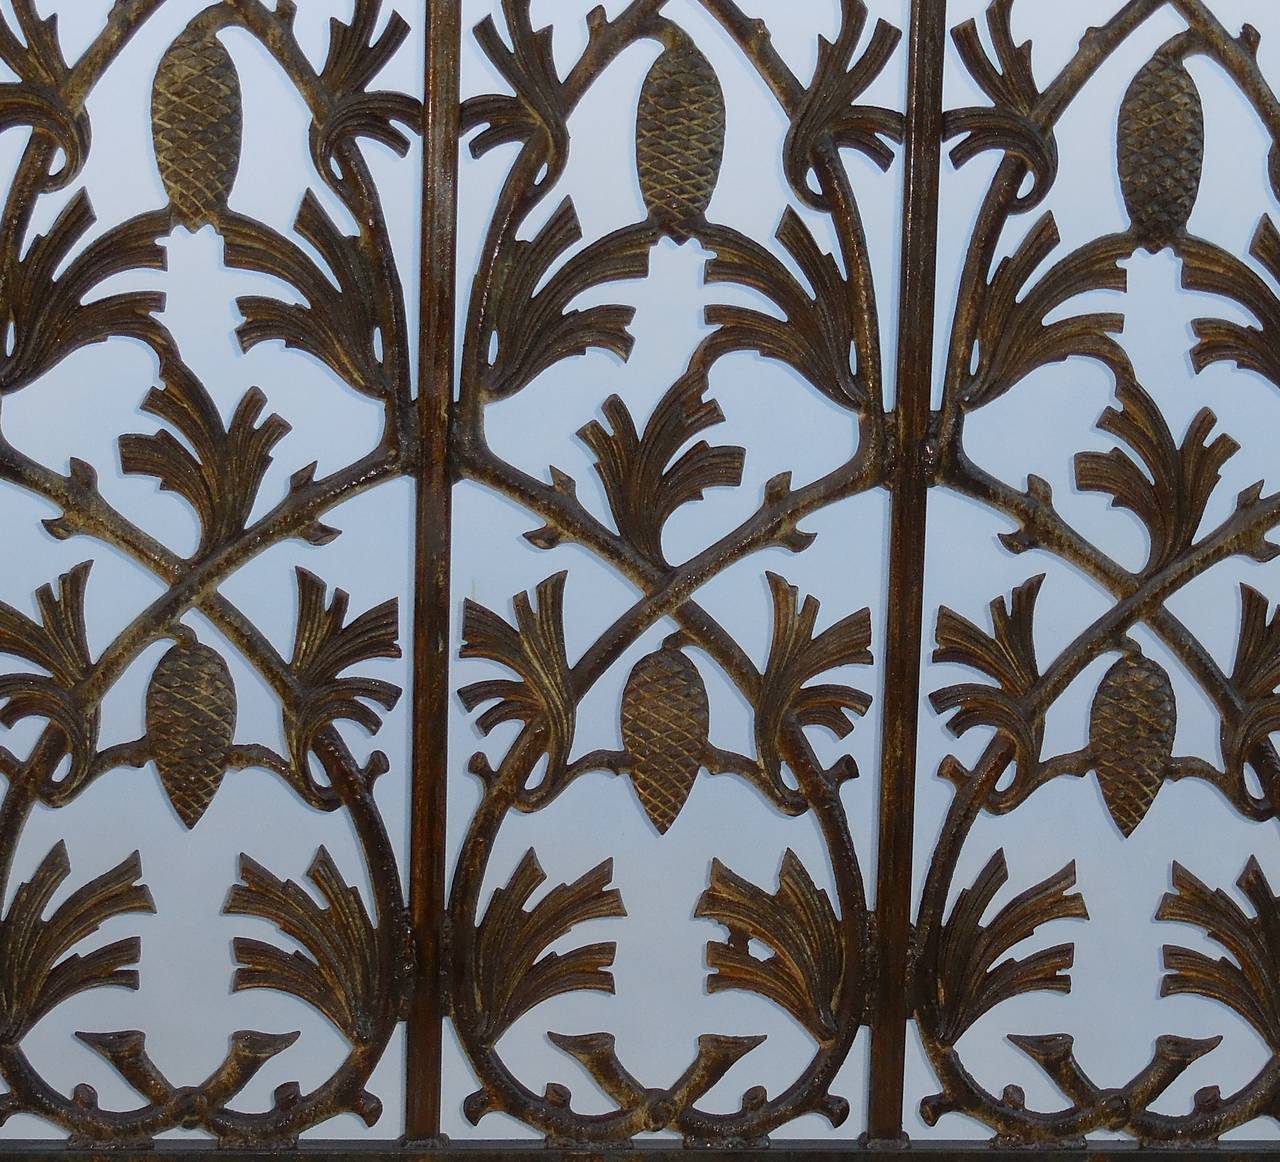 Beautiful fireplace screen made of cast iron with vines and pinecone motif
all around. Decorative legs, with great looking overall patina.